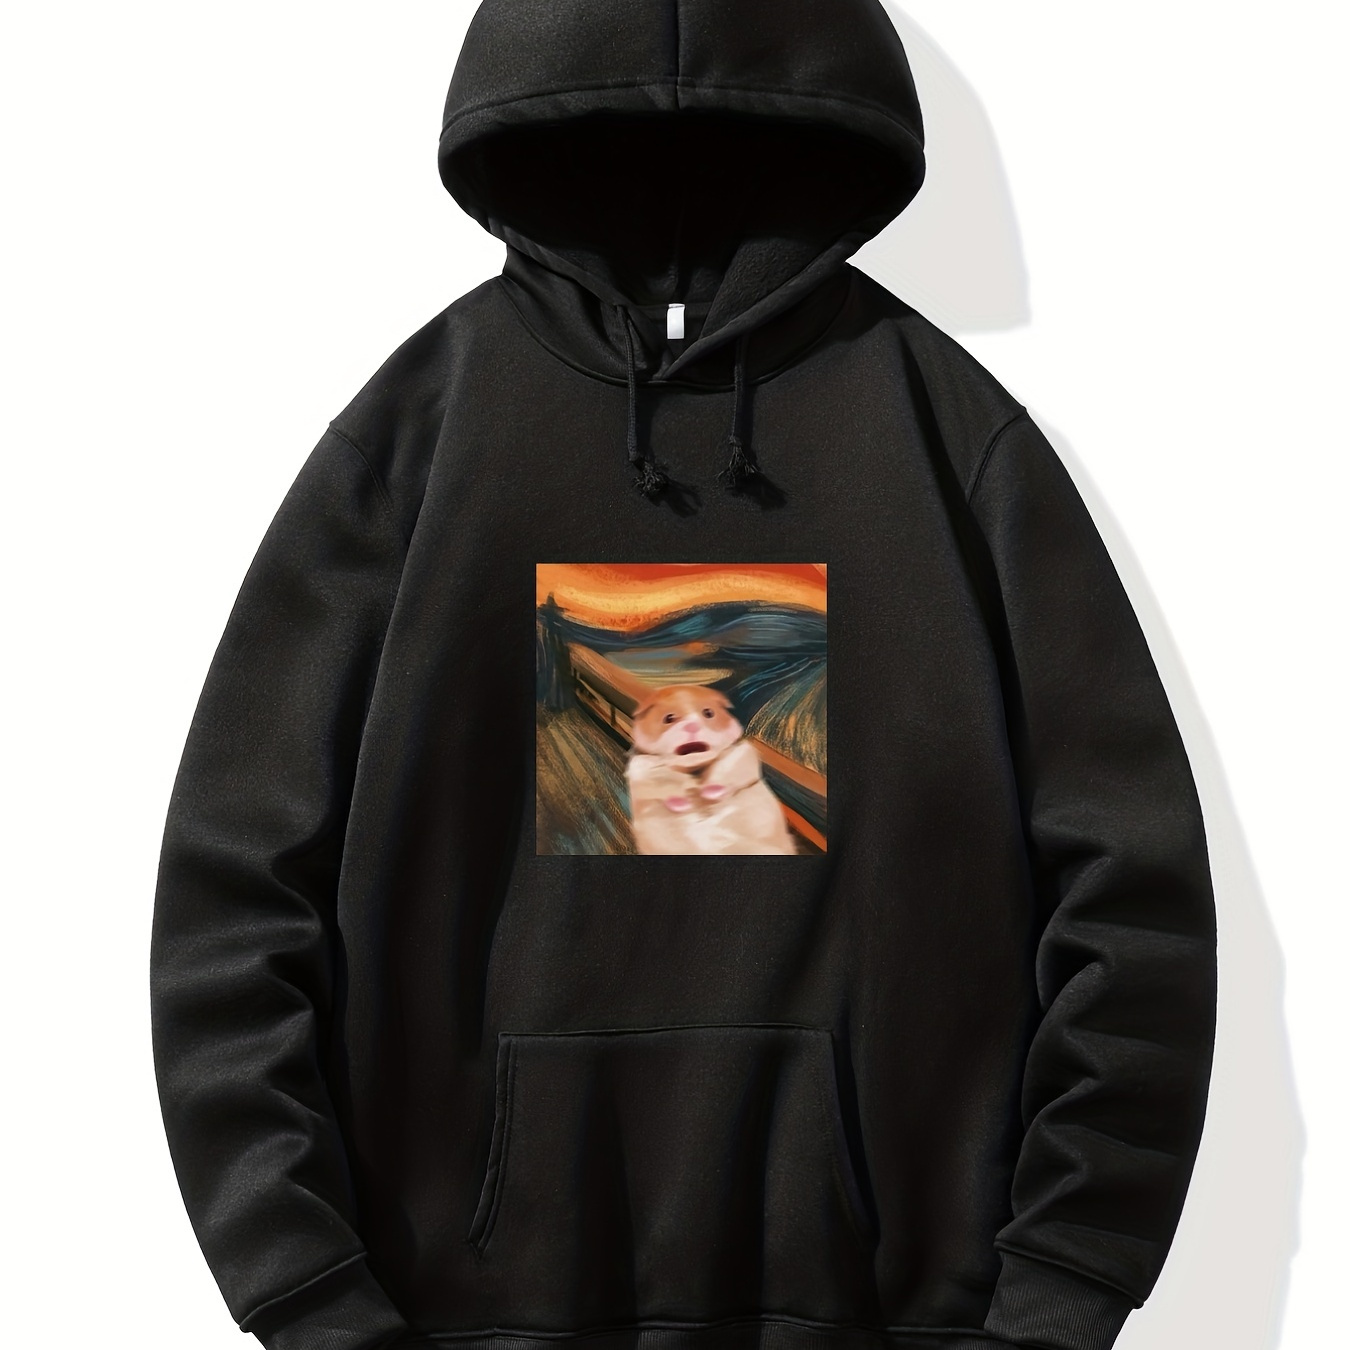 

Chic The Scream Hamster Print Hoodie, Hoodies Top For Men, Men’s Casual Pullover Hooded Graphic Design Sweatshirt With Kangaroo Pocket For Spring Fall, As Gifts